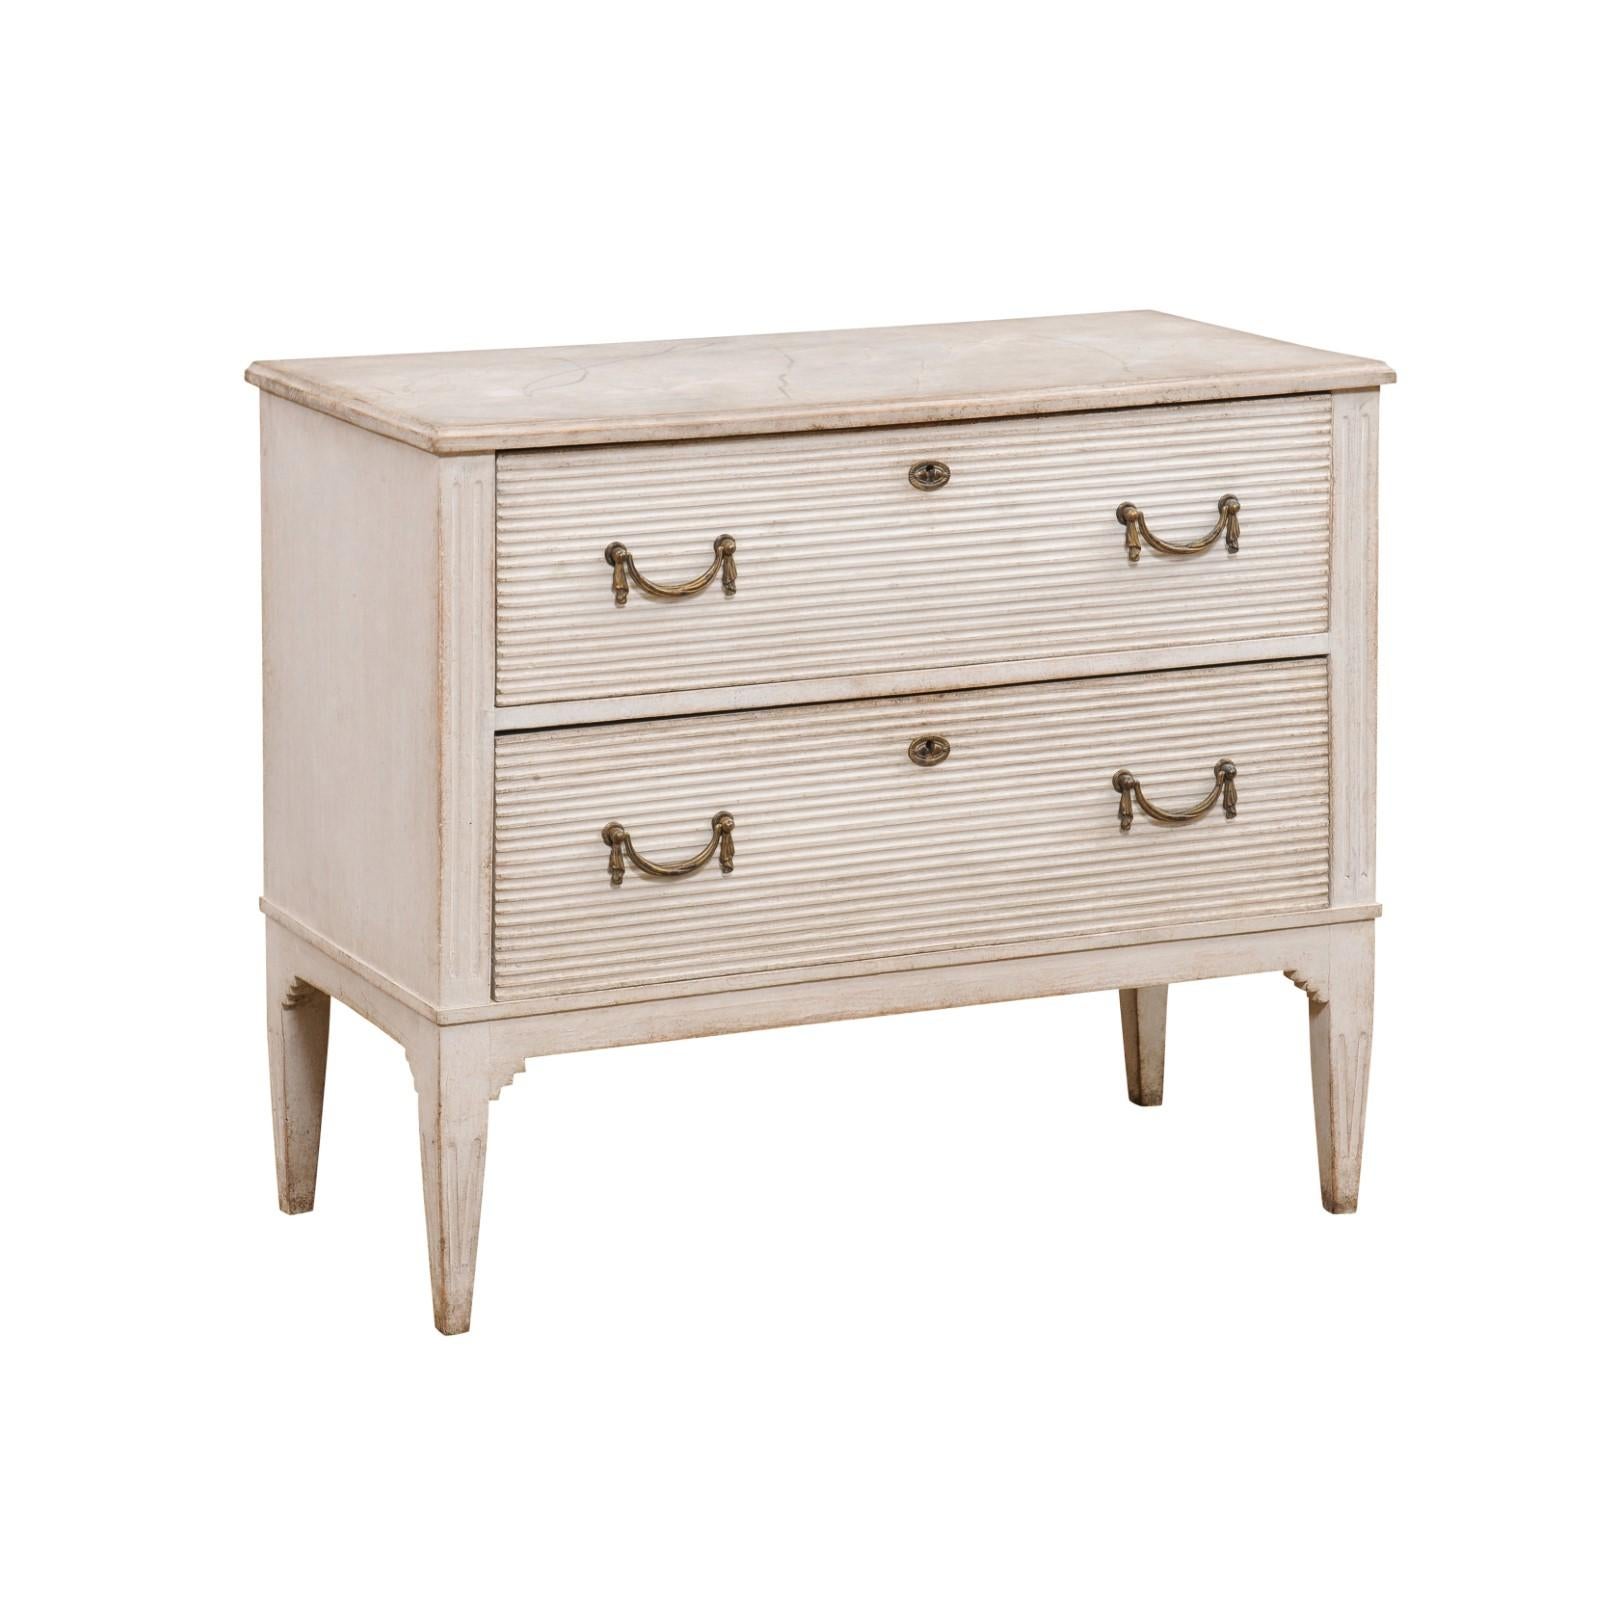 Swedish Gustavian Style 19th Century Painted Wood Chest with Reeded Accents For Sale 9